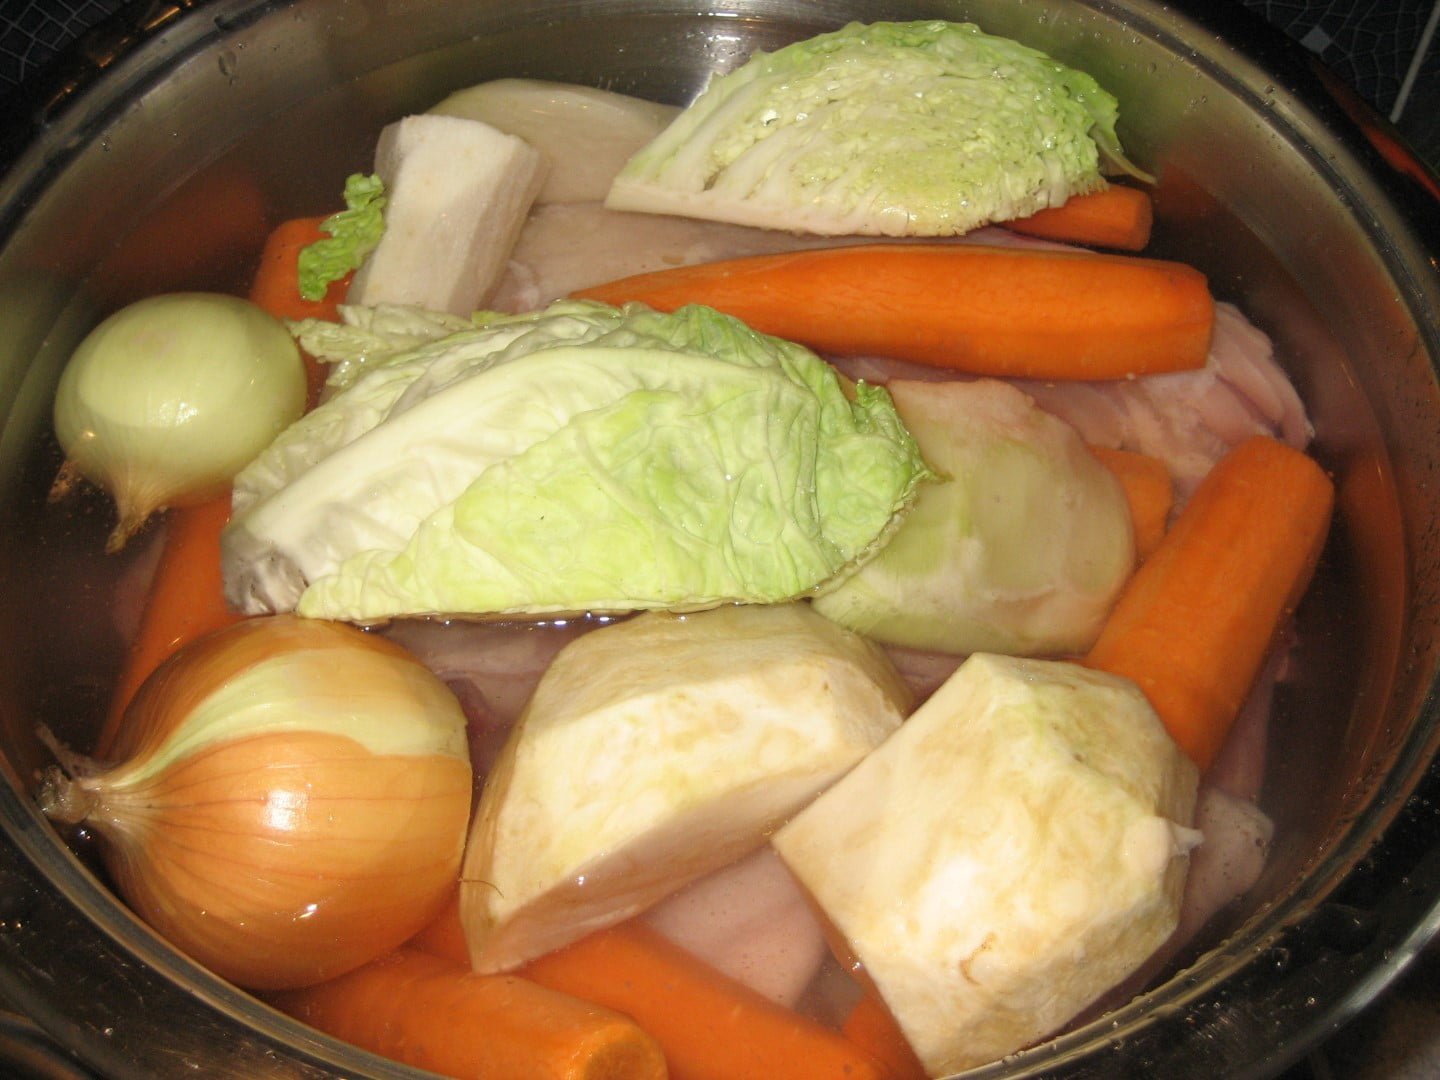 Easy Chicken Stock Recipe With a Simple Trick - Spicy Goulash